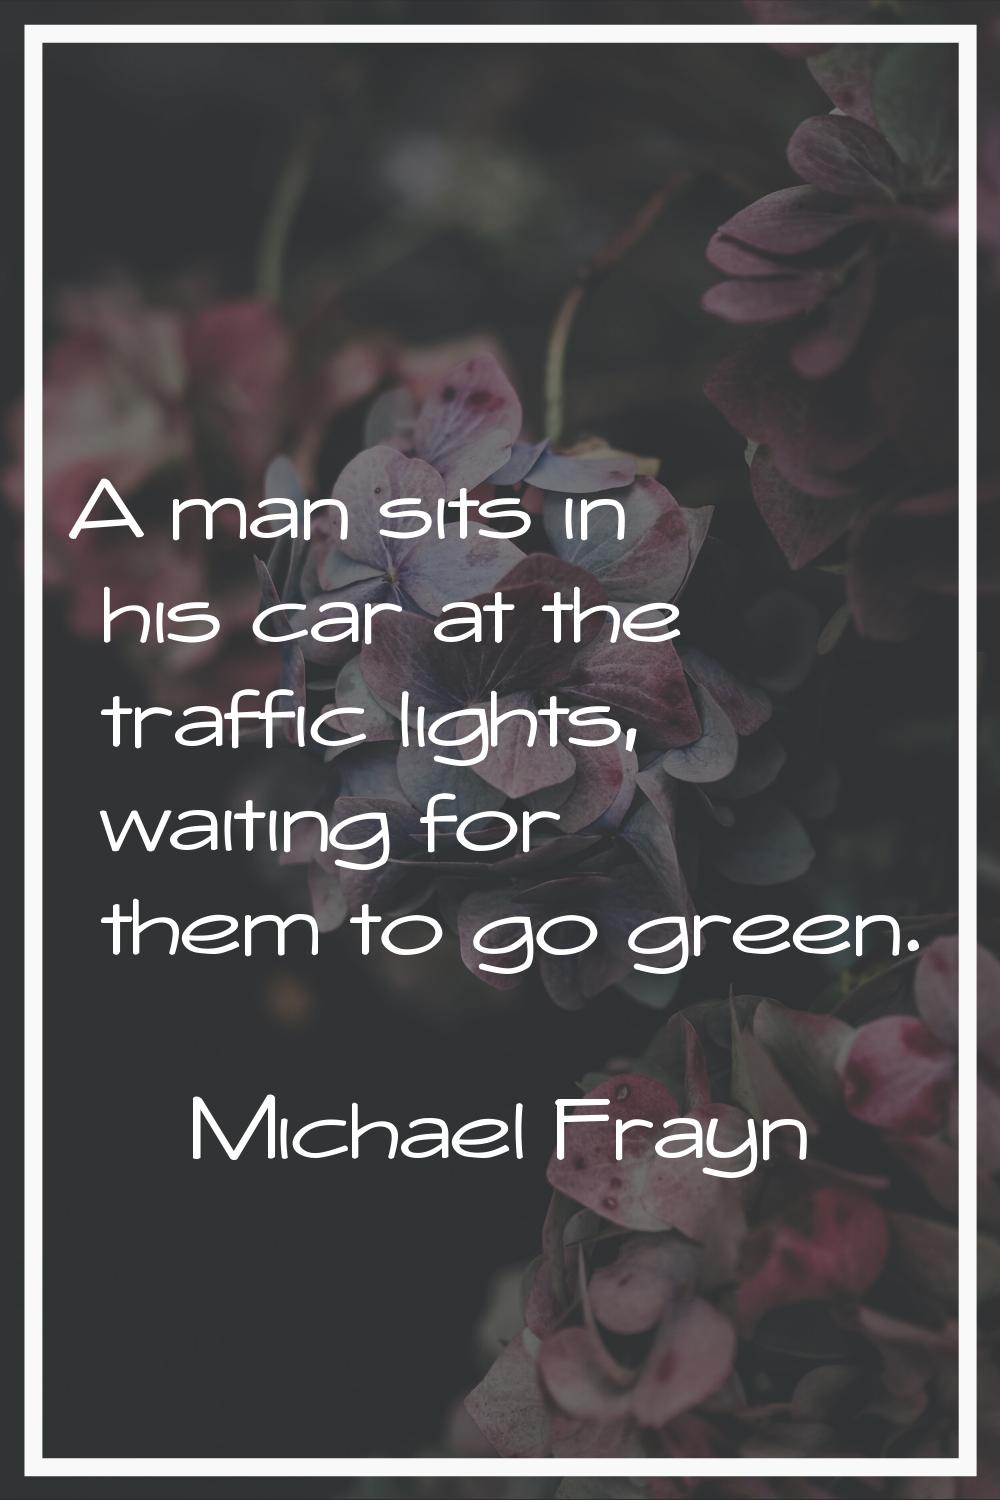 A man sits in his car at the traffic lights, waiting for them to go green.